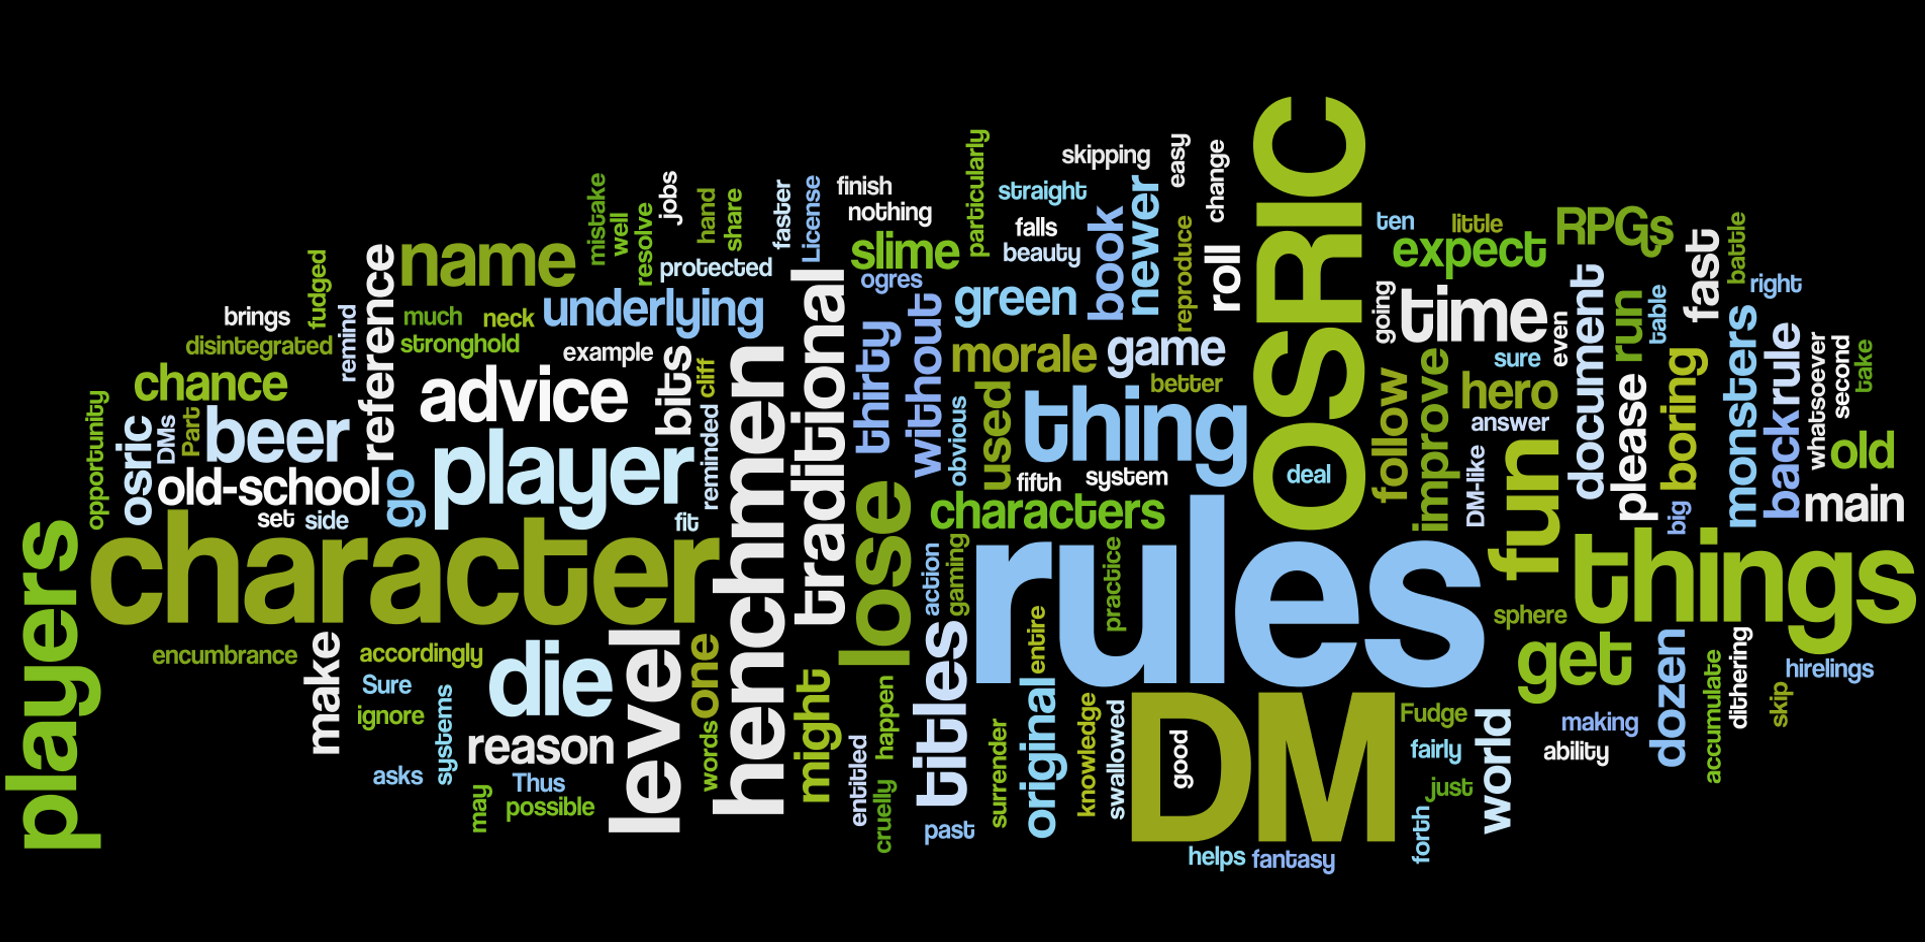 Wordle4.png  by rredmond